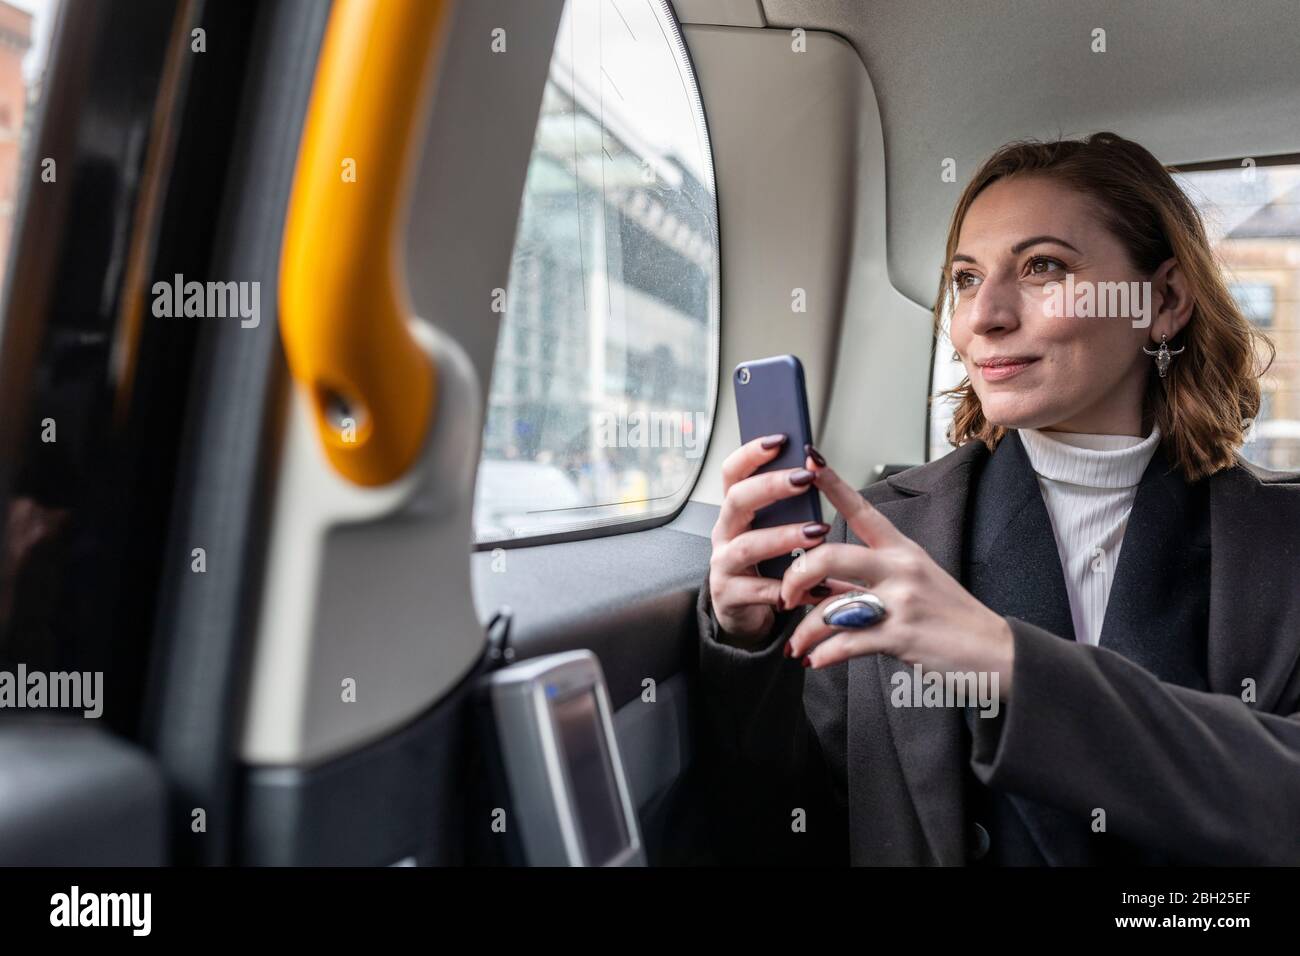 Businesswoman in the rear of a taxi looking out of the window, London, UK Stock Photo